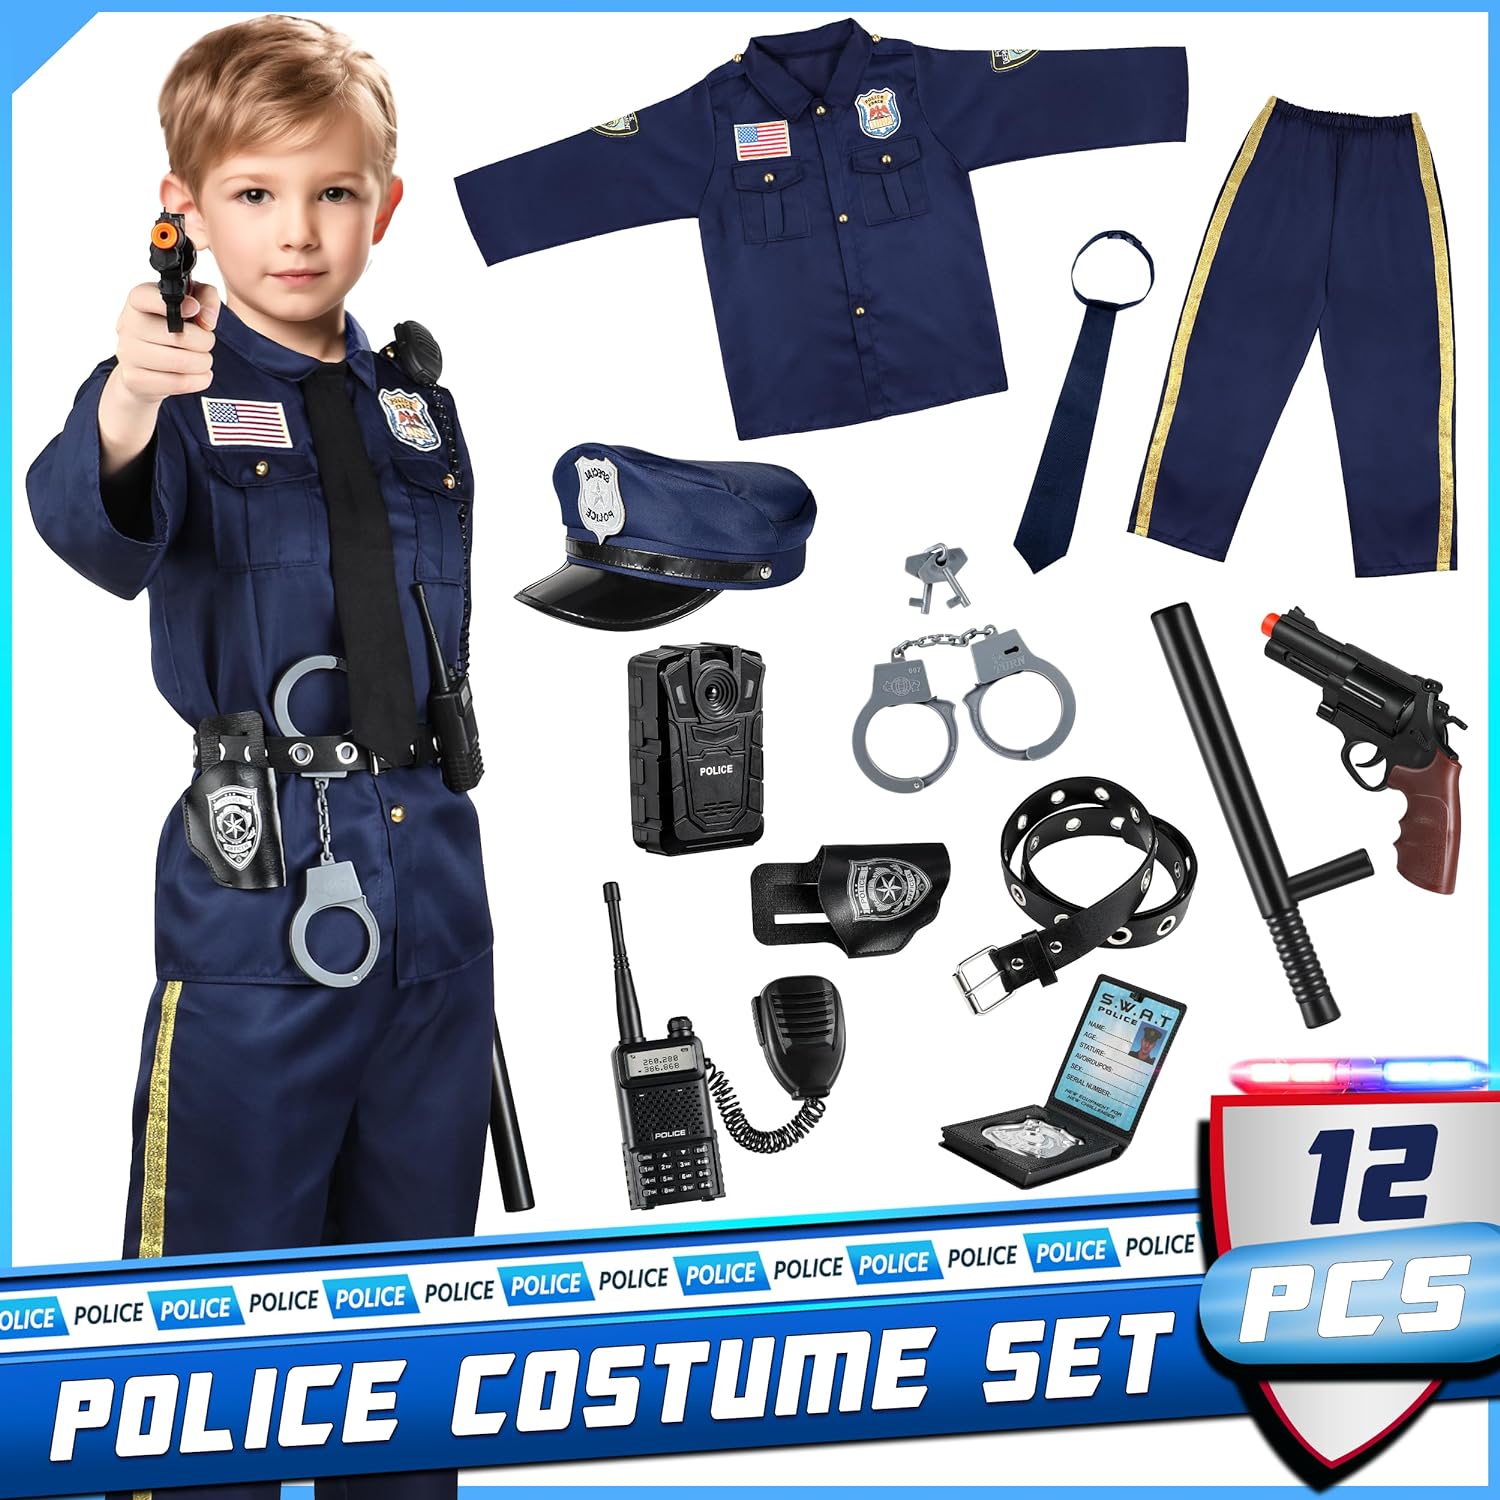 Police Officer Costume for Kids - Deluxe Police Costume for Kids with Accessories, Kids Halloween Costumes - Cykapu